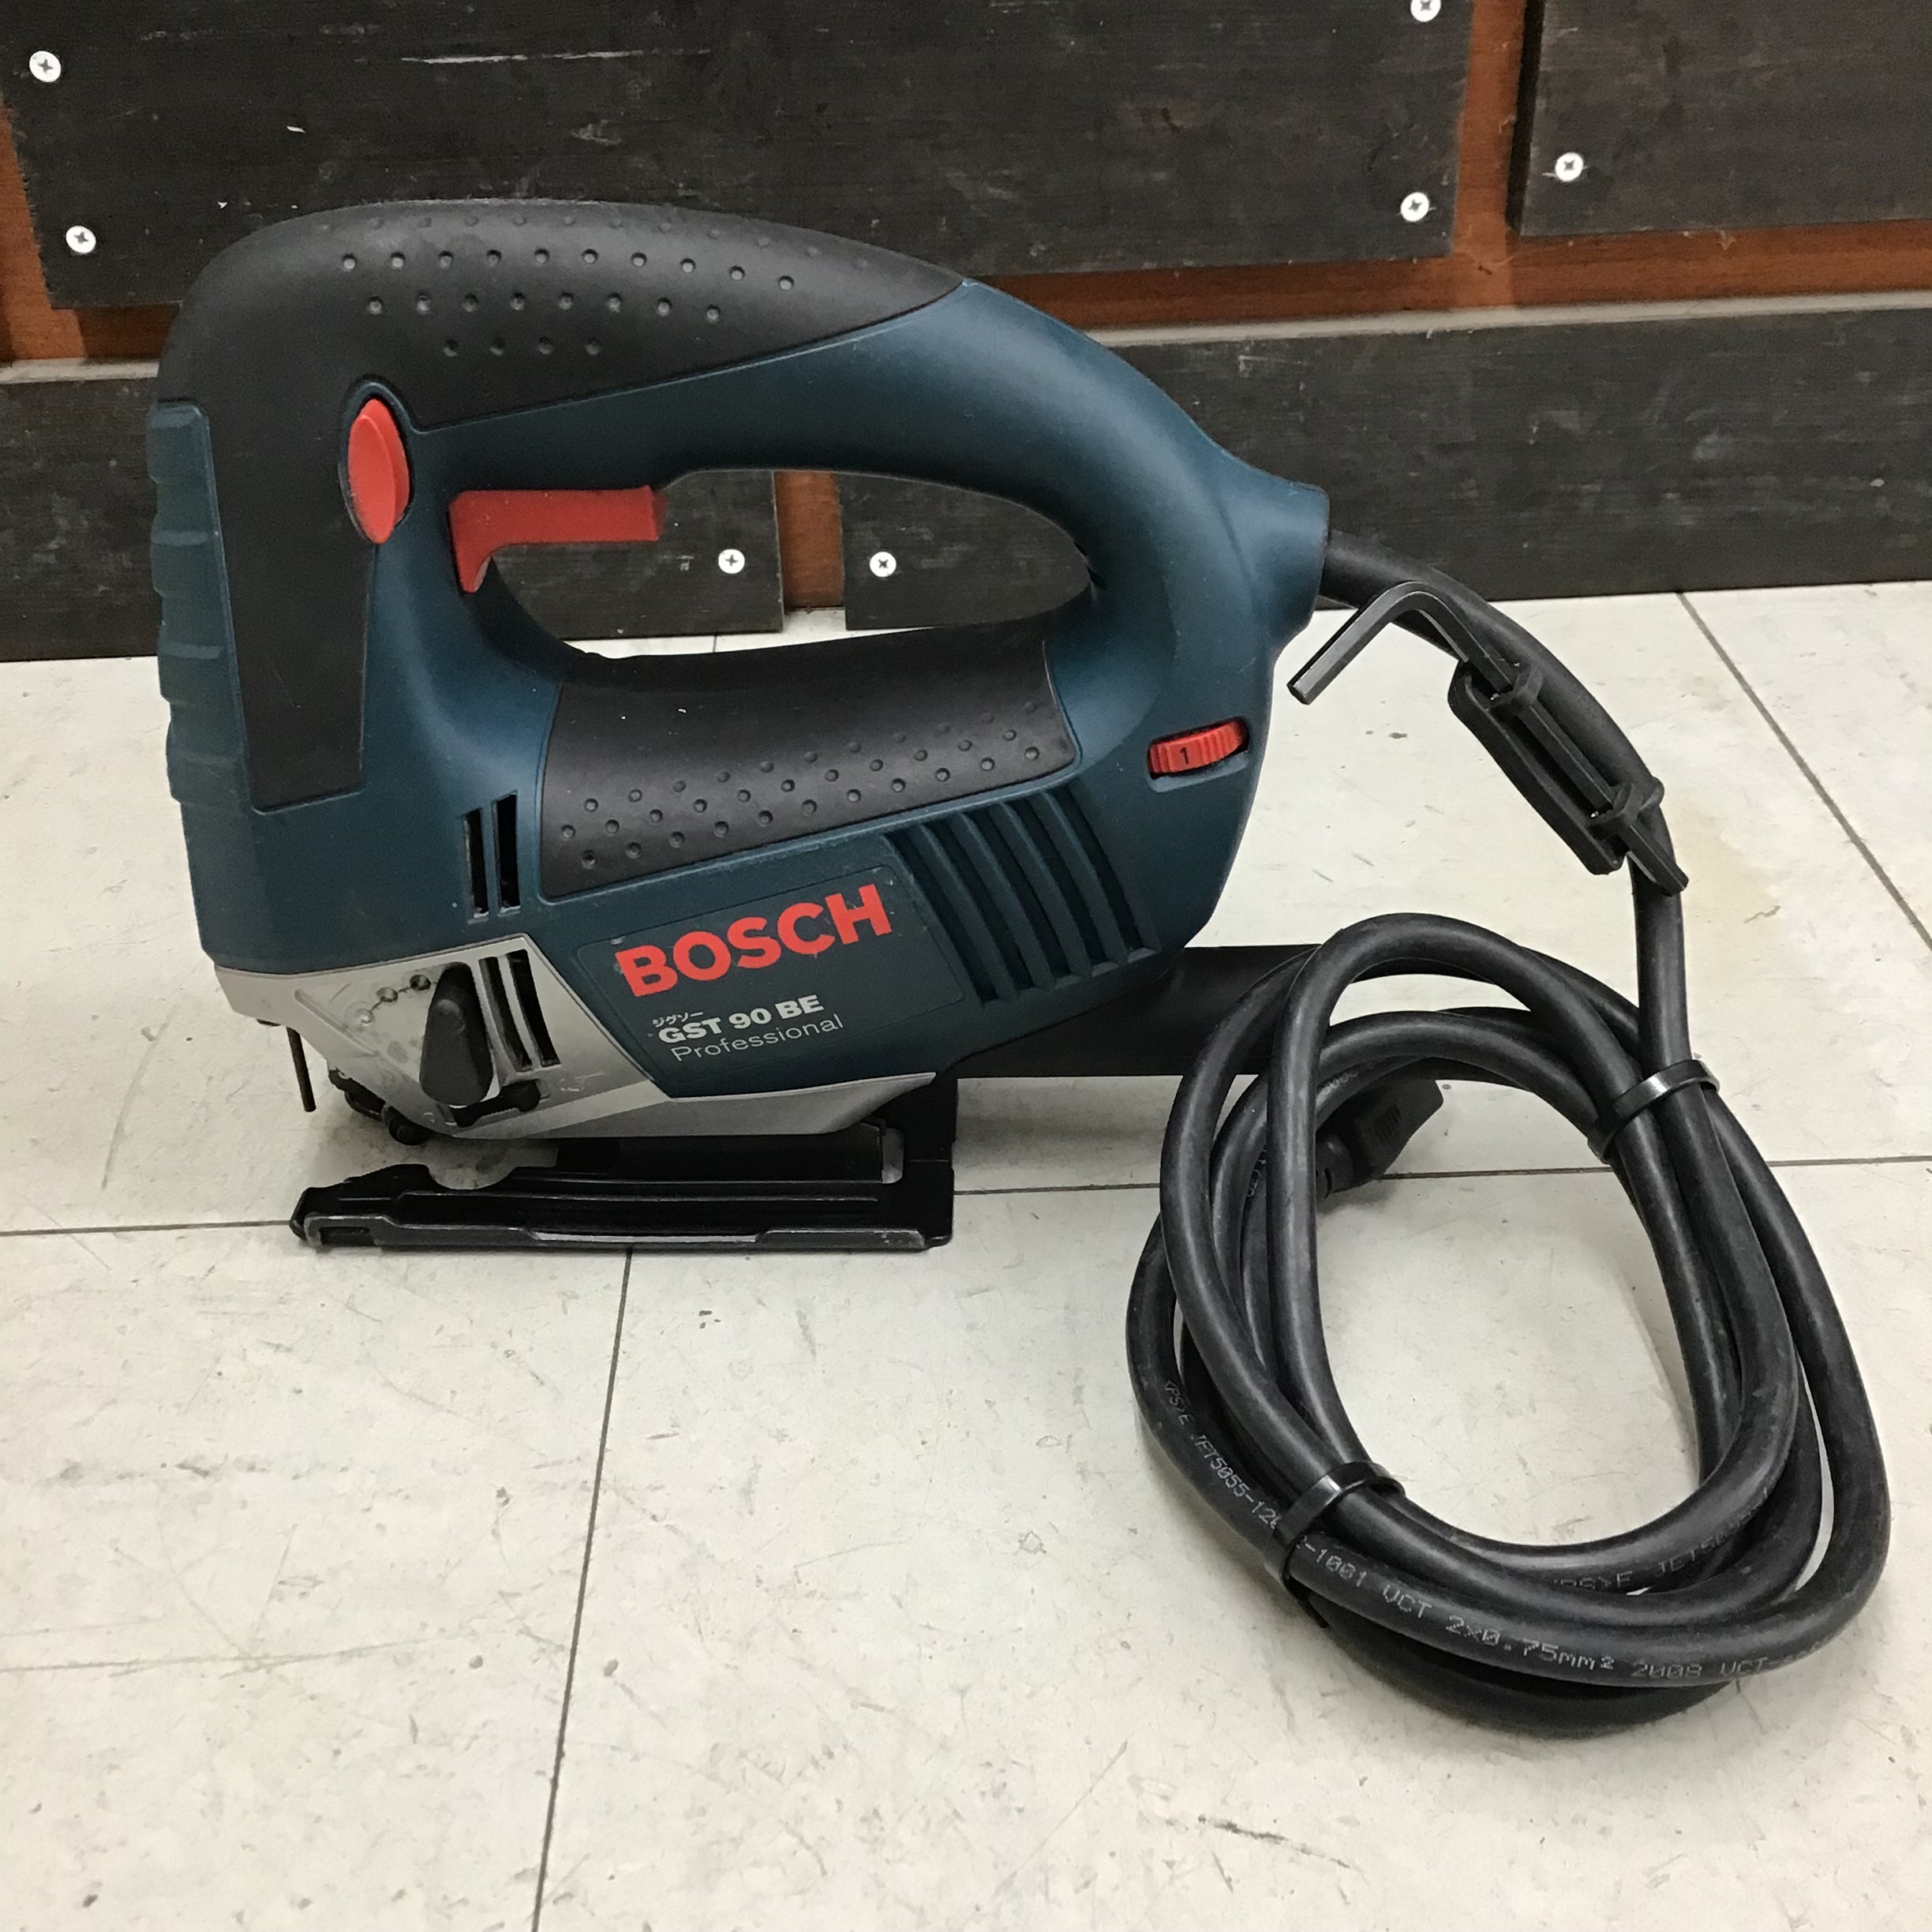 〇BOSCH(ボッシュ) ジグソー GST90BE/N 【鴻巣店】 – アクトツール 